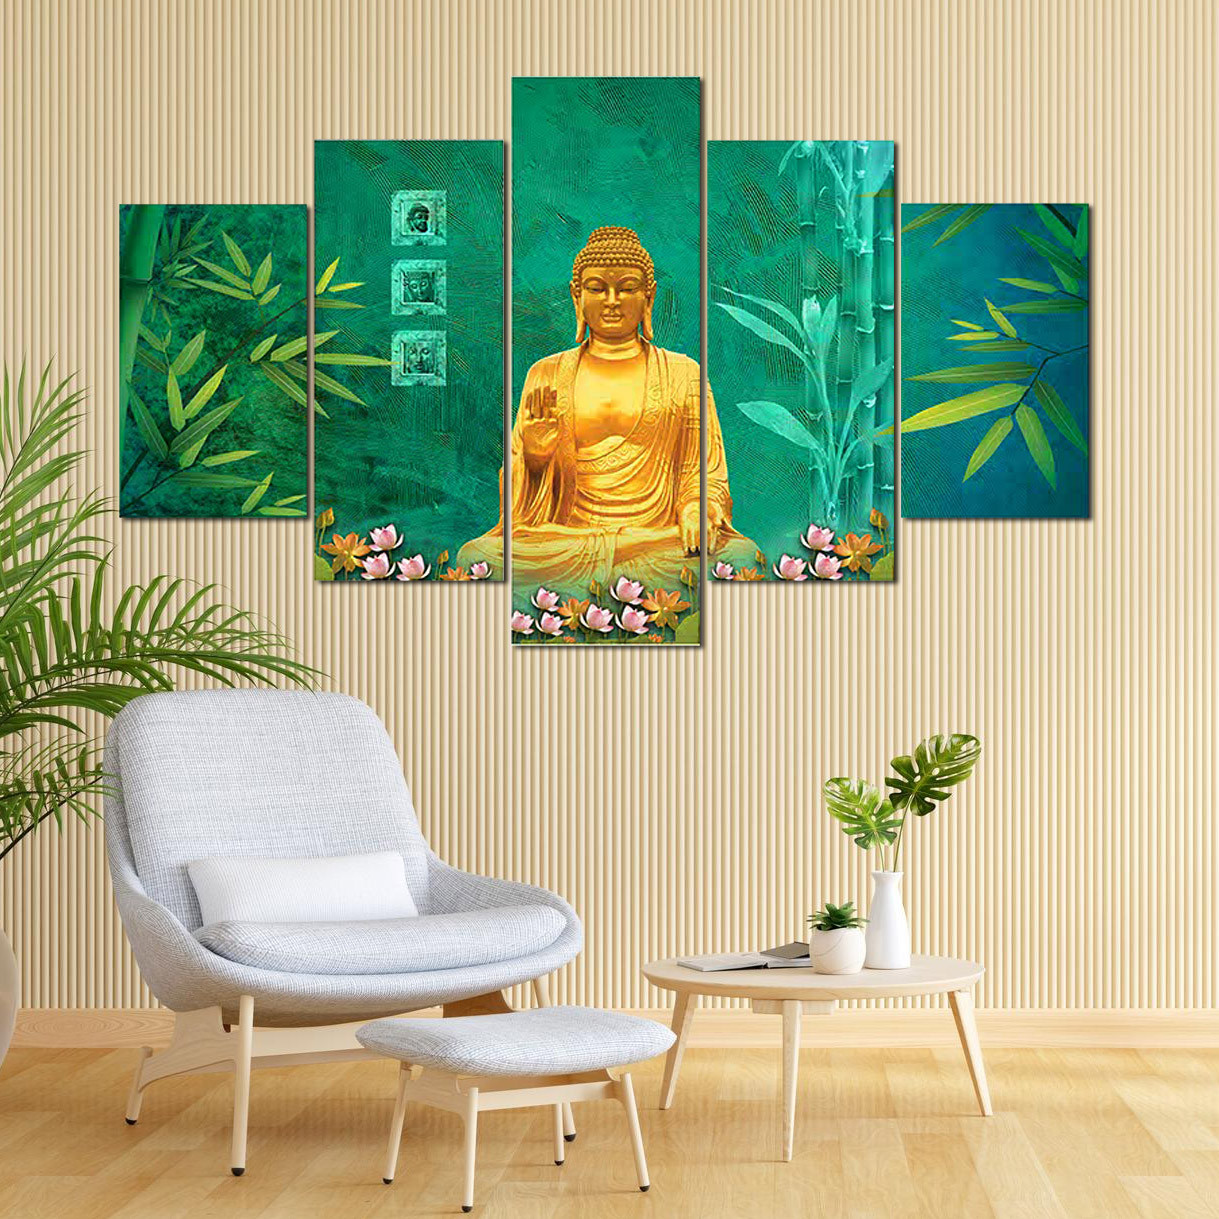 Kuber Industries Wall Paintings | MDF Wooden Wall Art for Living Room |Wall Sculpture | Lord Buddha Painting for Bedroom | Office | Hotels | Gift | 2450KIB2 |5 Piece Set| Green